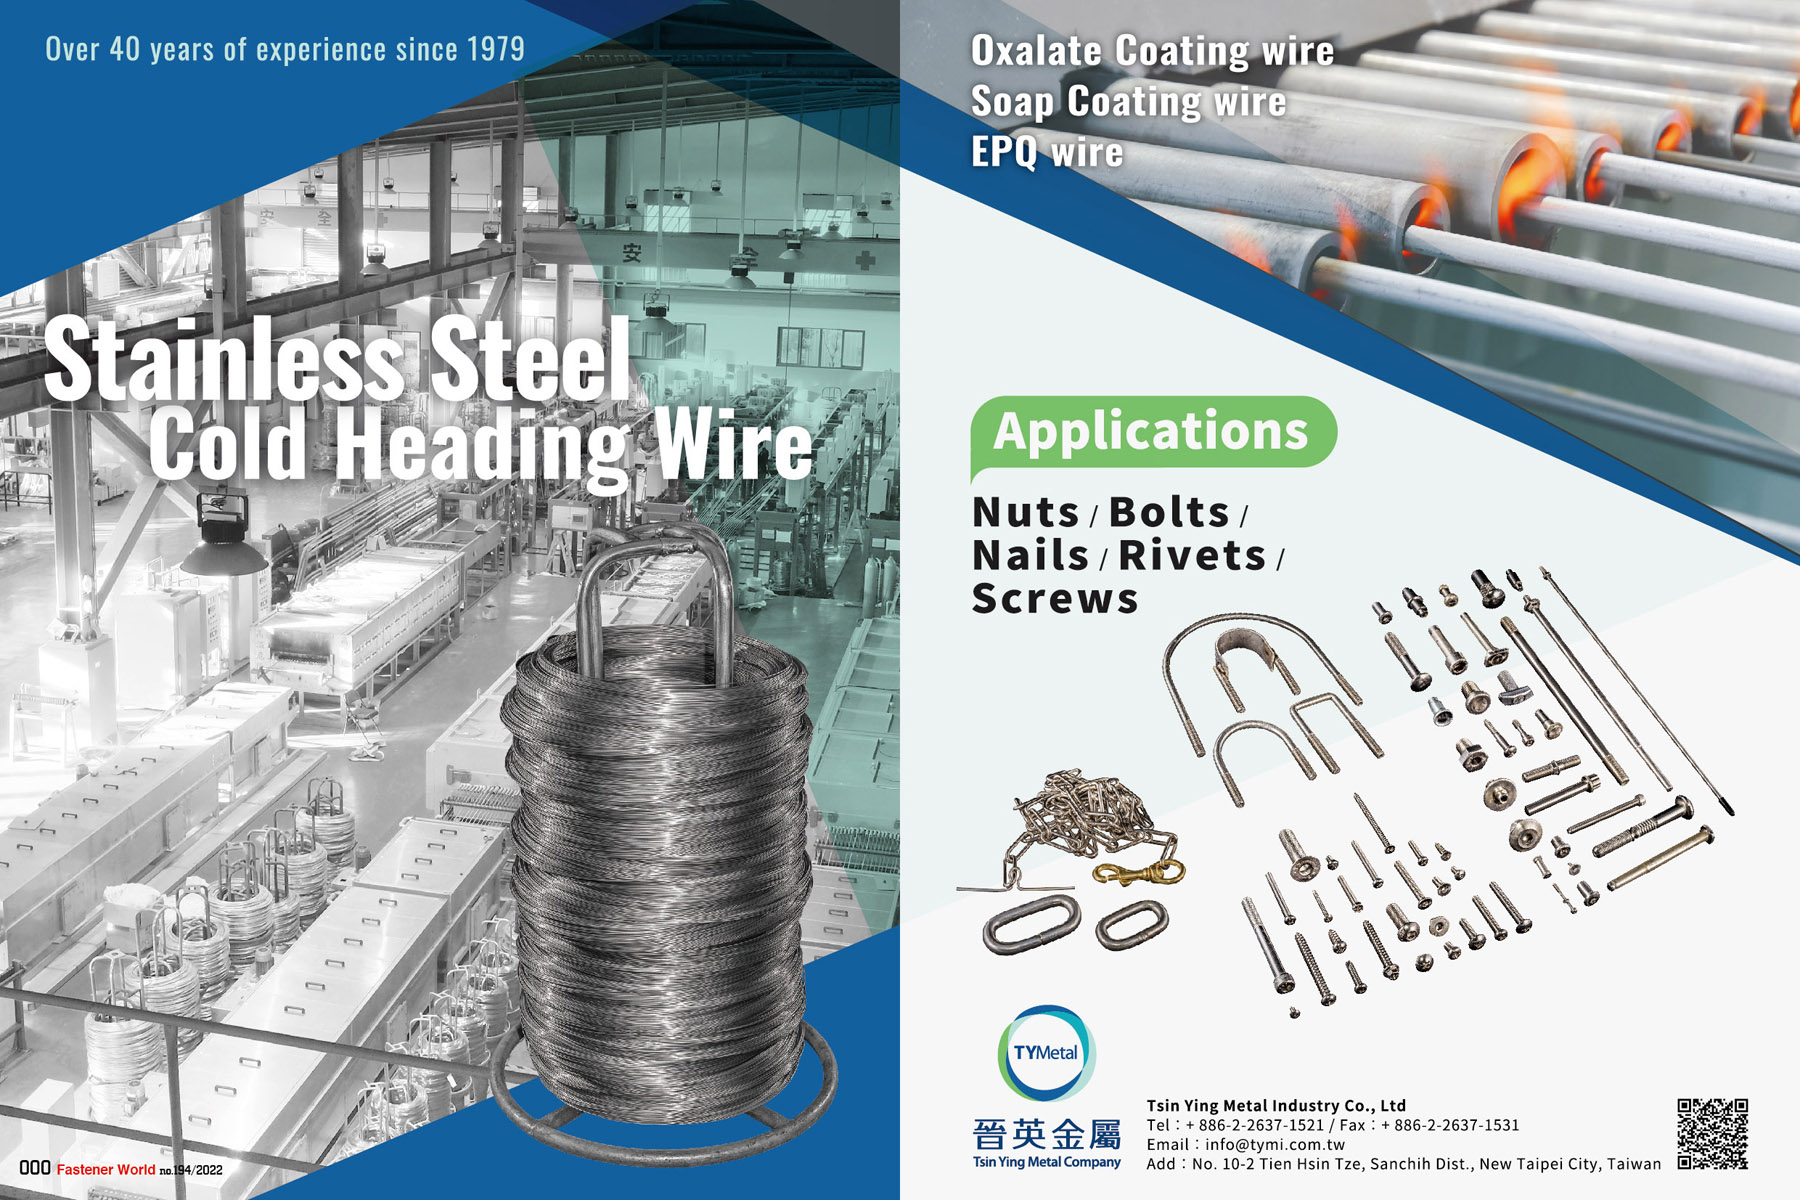 TSIN YING METAL INDUSTRY CO., LTD, , Stainless Steel Cold Heading Wire, Oxalate Coating Wire, Soap Coating Wire, EPQ wire